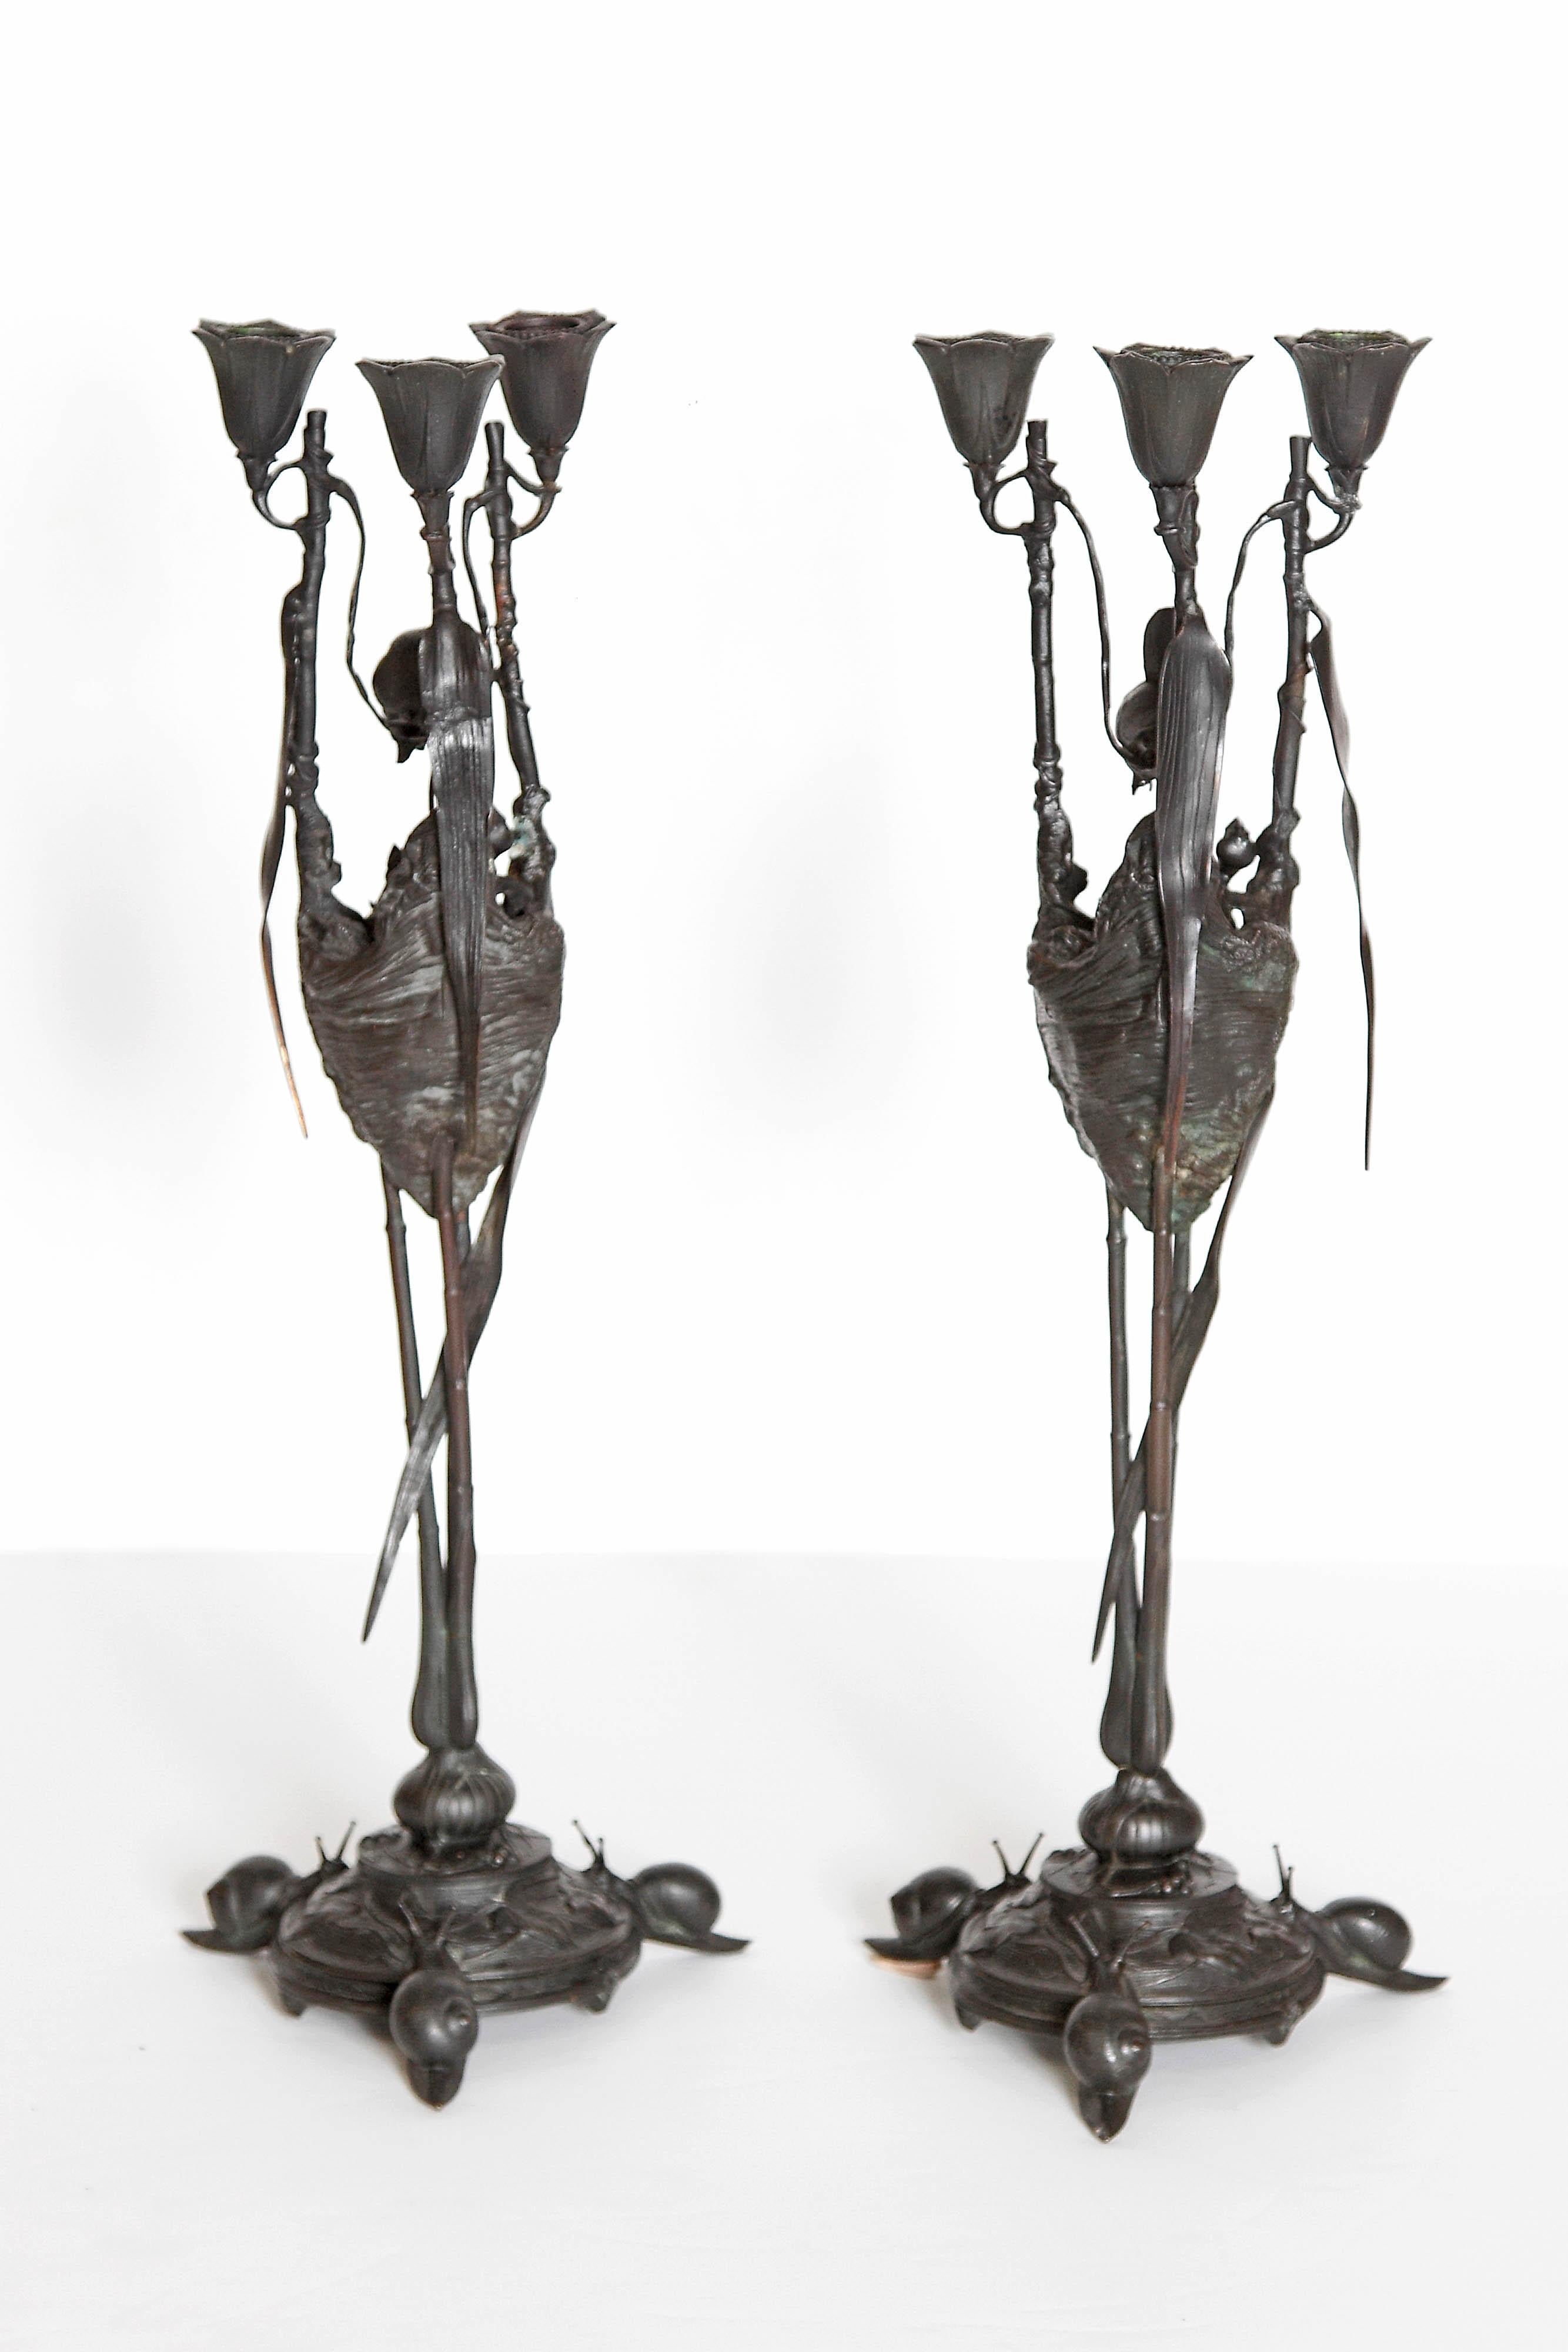 Auguste-Nicolas Cain, Pair of French Candelabra with Bird's Nest 3